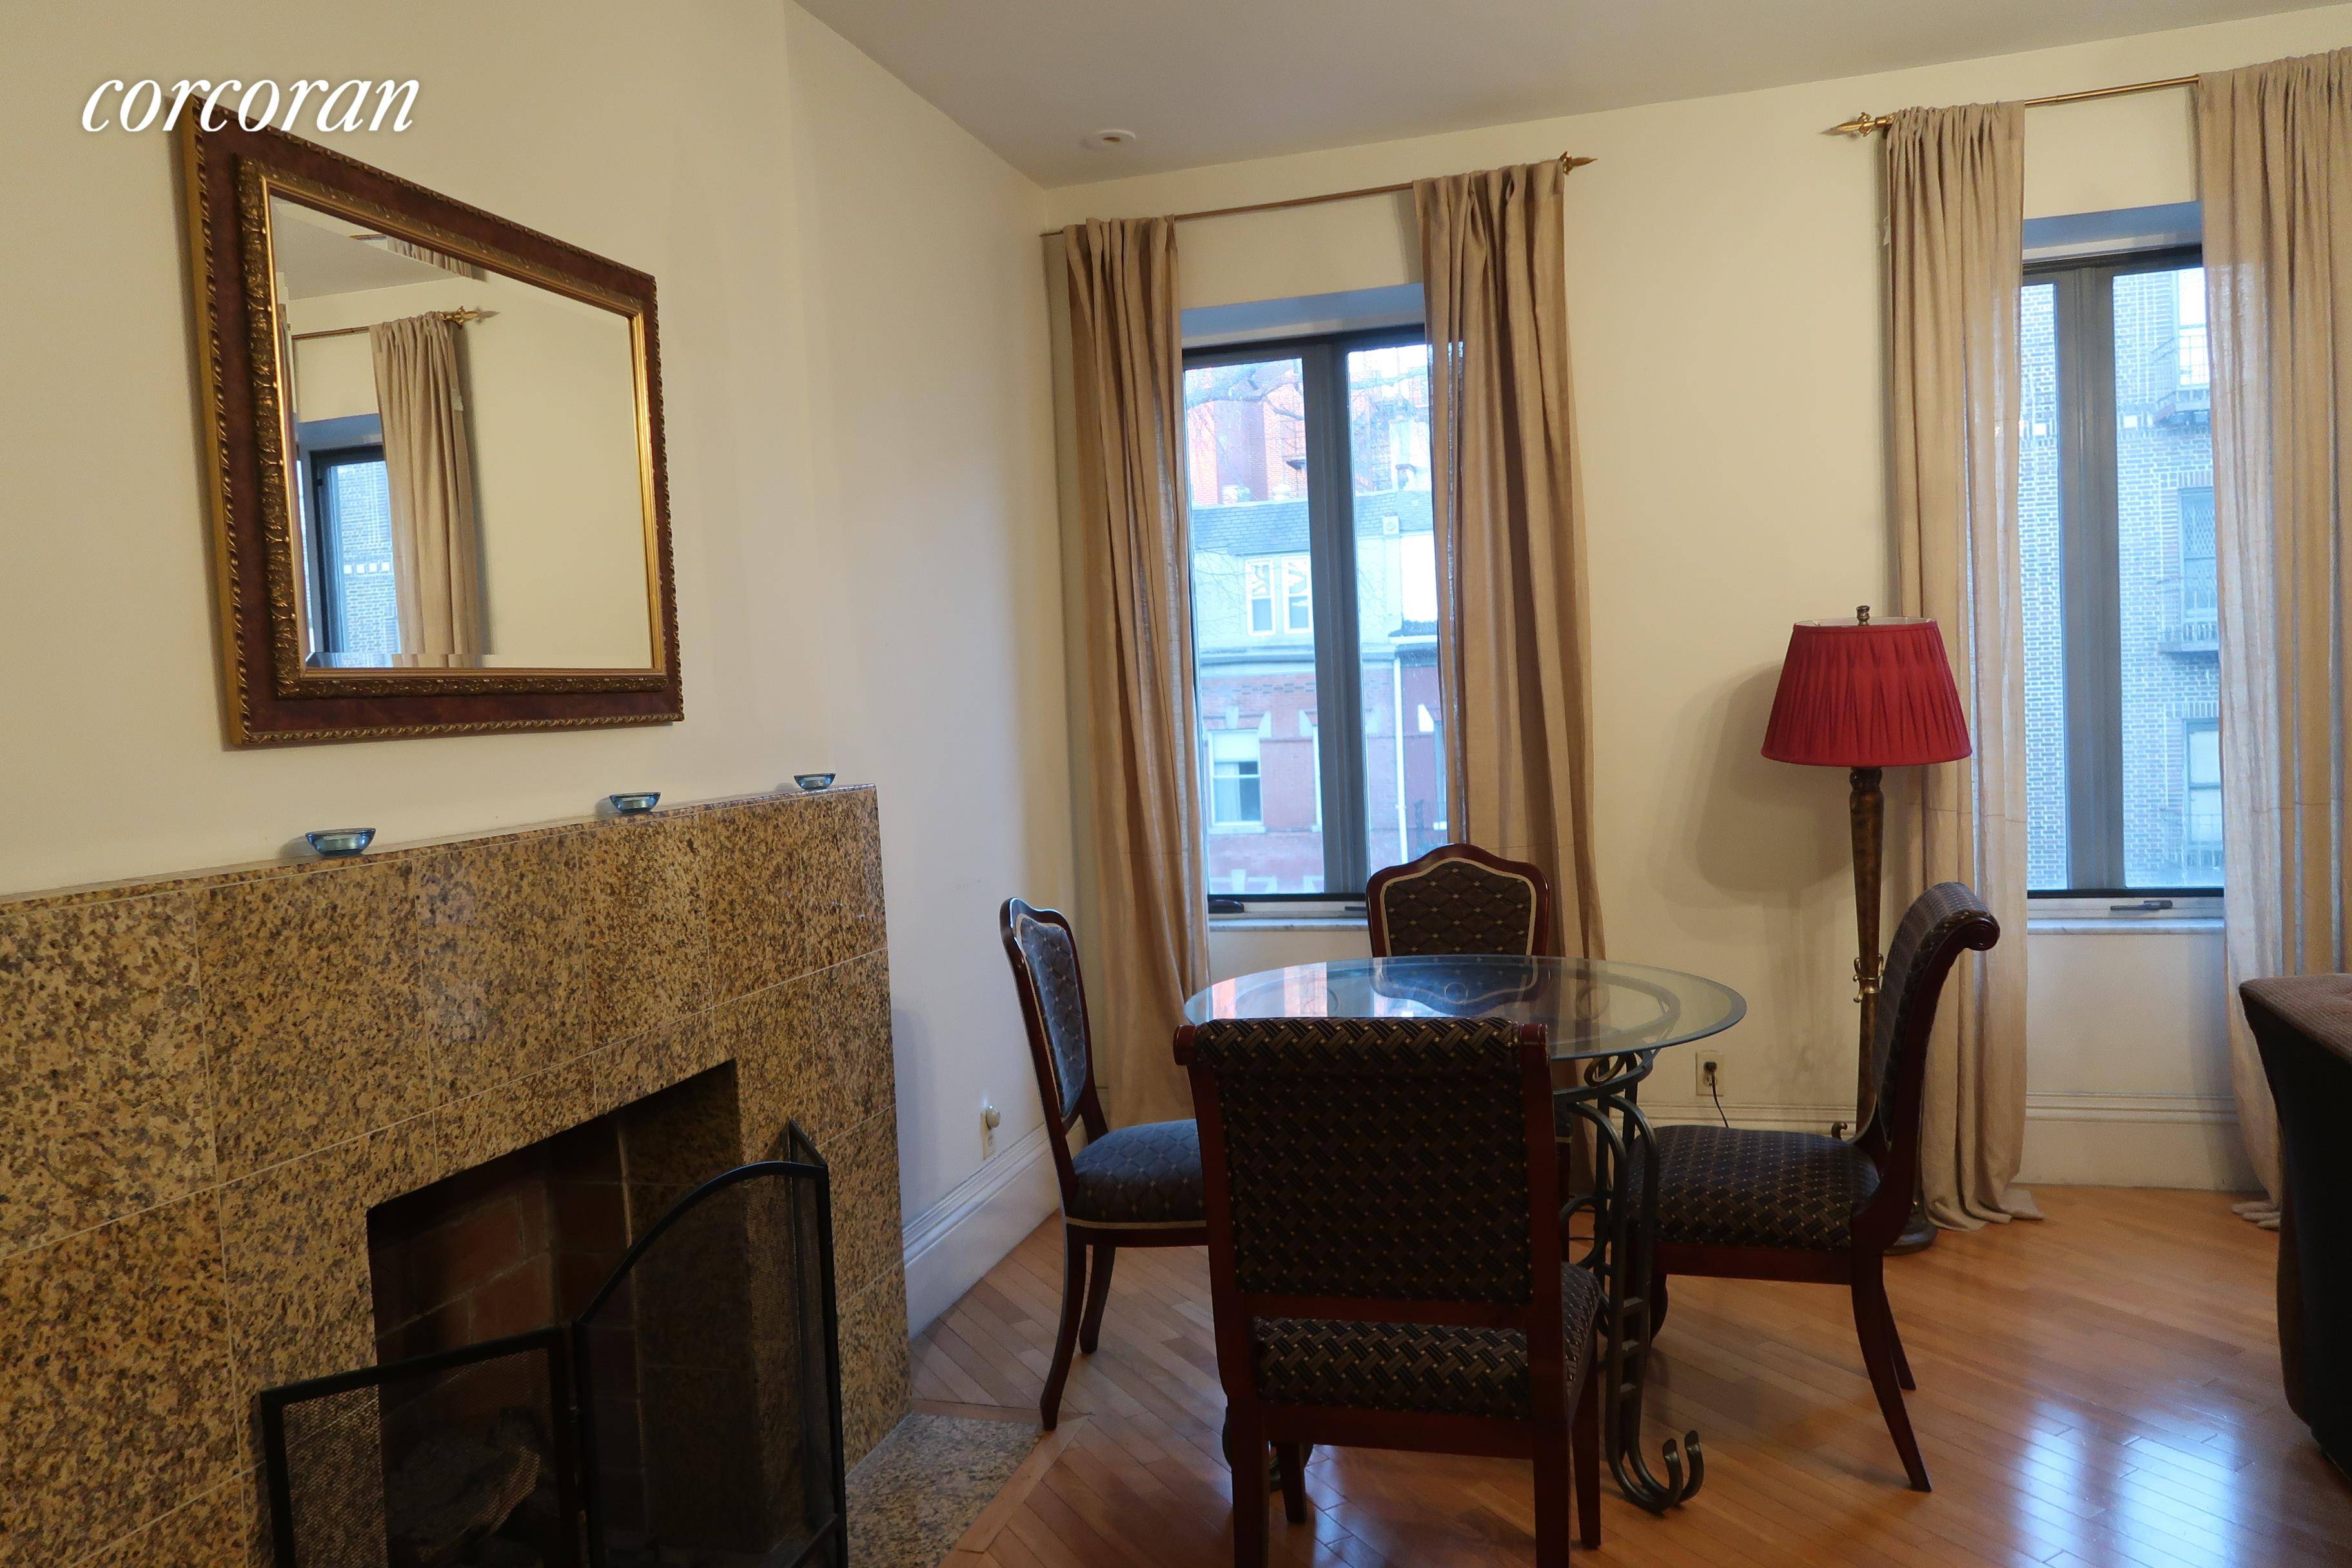 Third floor unit in a beautiful brownstone in Harlem, completely furnished and ready for move in !